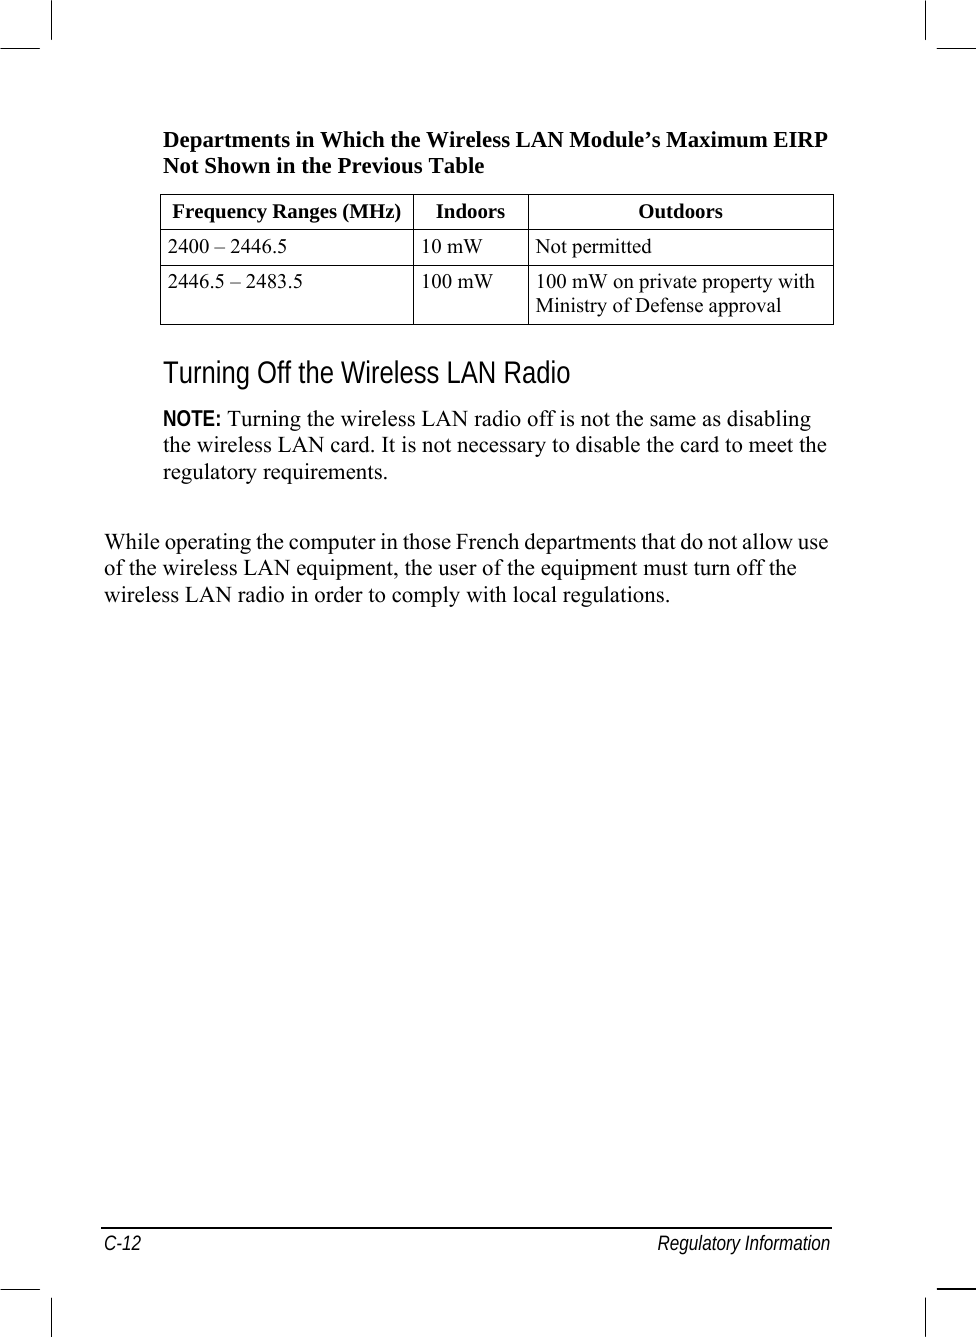  C-12 Regulatory Information Departments in Which the Wireless LAN Module’s Maximum EIRP  Not Shown in the Previous Table  Frequency Ranges (MHz) Indoors  Outdoors 2400 – 2446.5  10 mW  Not permitted 2446.5 – 2483.5  100 mW  100 mW on private property with Ministry of Defense approval   Turning Off the Wireless LAN Radio  NOTE: Turning the wireless LAN radio off is not the same as disabling  the wireless LAN card. It is not necessary to disable the card to meet the  regulatory requirements.  While operating the computer in those French departments that do not allow use  of the wireless LAN equipment, the user of the equipment must turn off the  wireless LAN radio in order to comply with local regulations.  